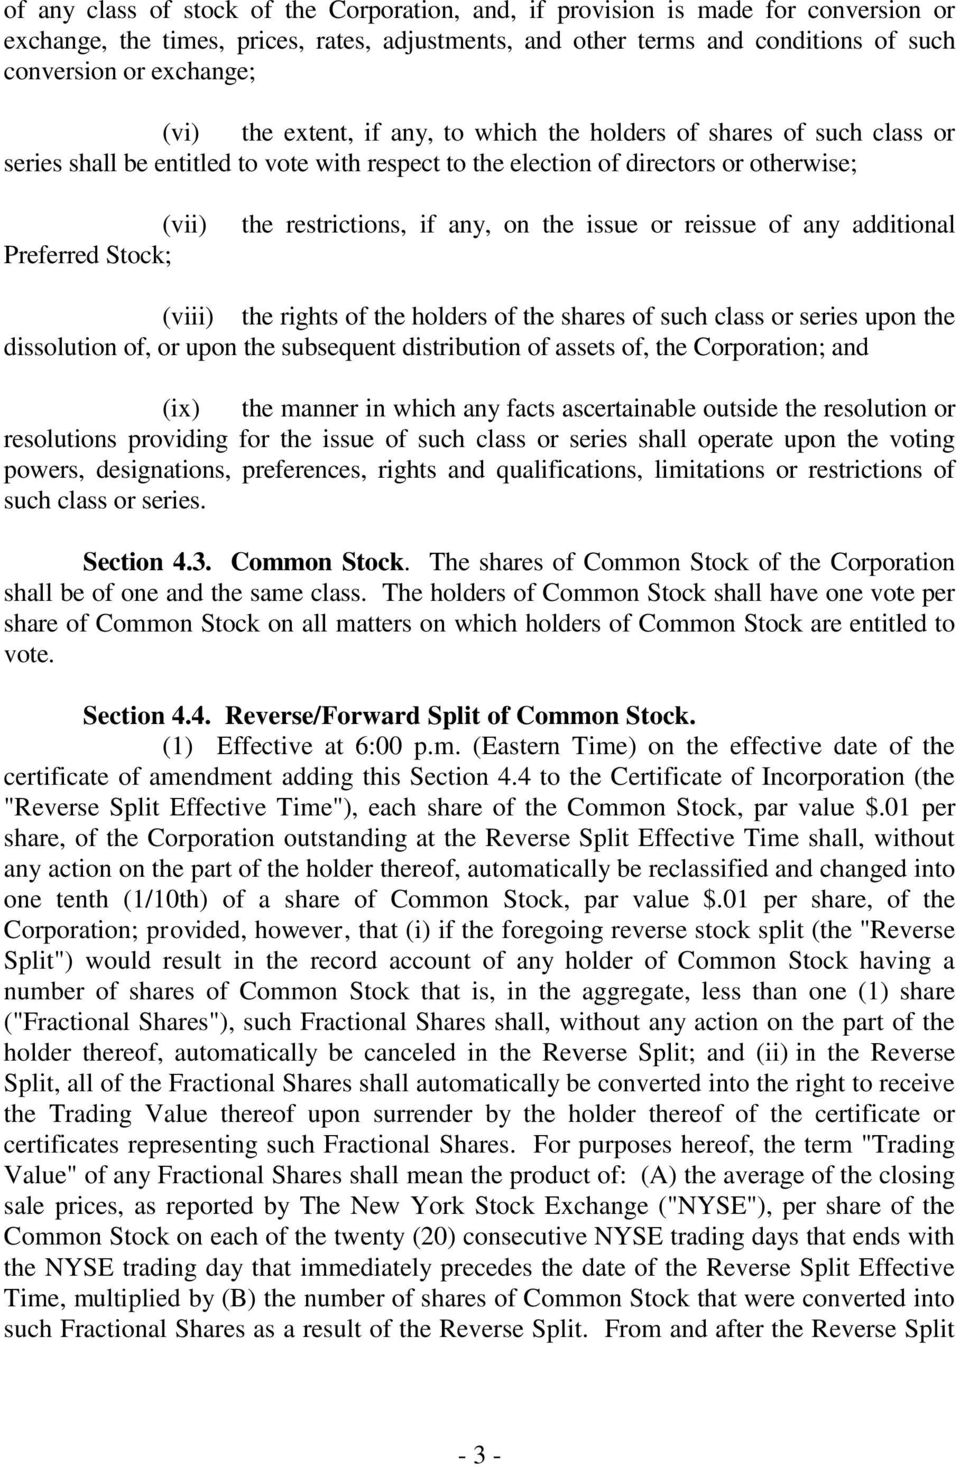 restrictions, if any, on the issue or reissue of any additional (viii) the rights of the holders of the shares of such class or series upon the dissolution of, or upon the subsequent distribution of